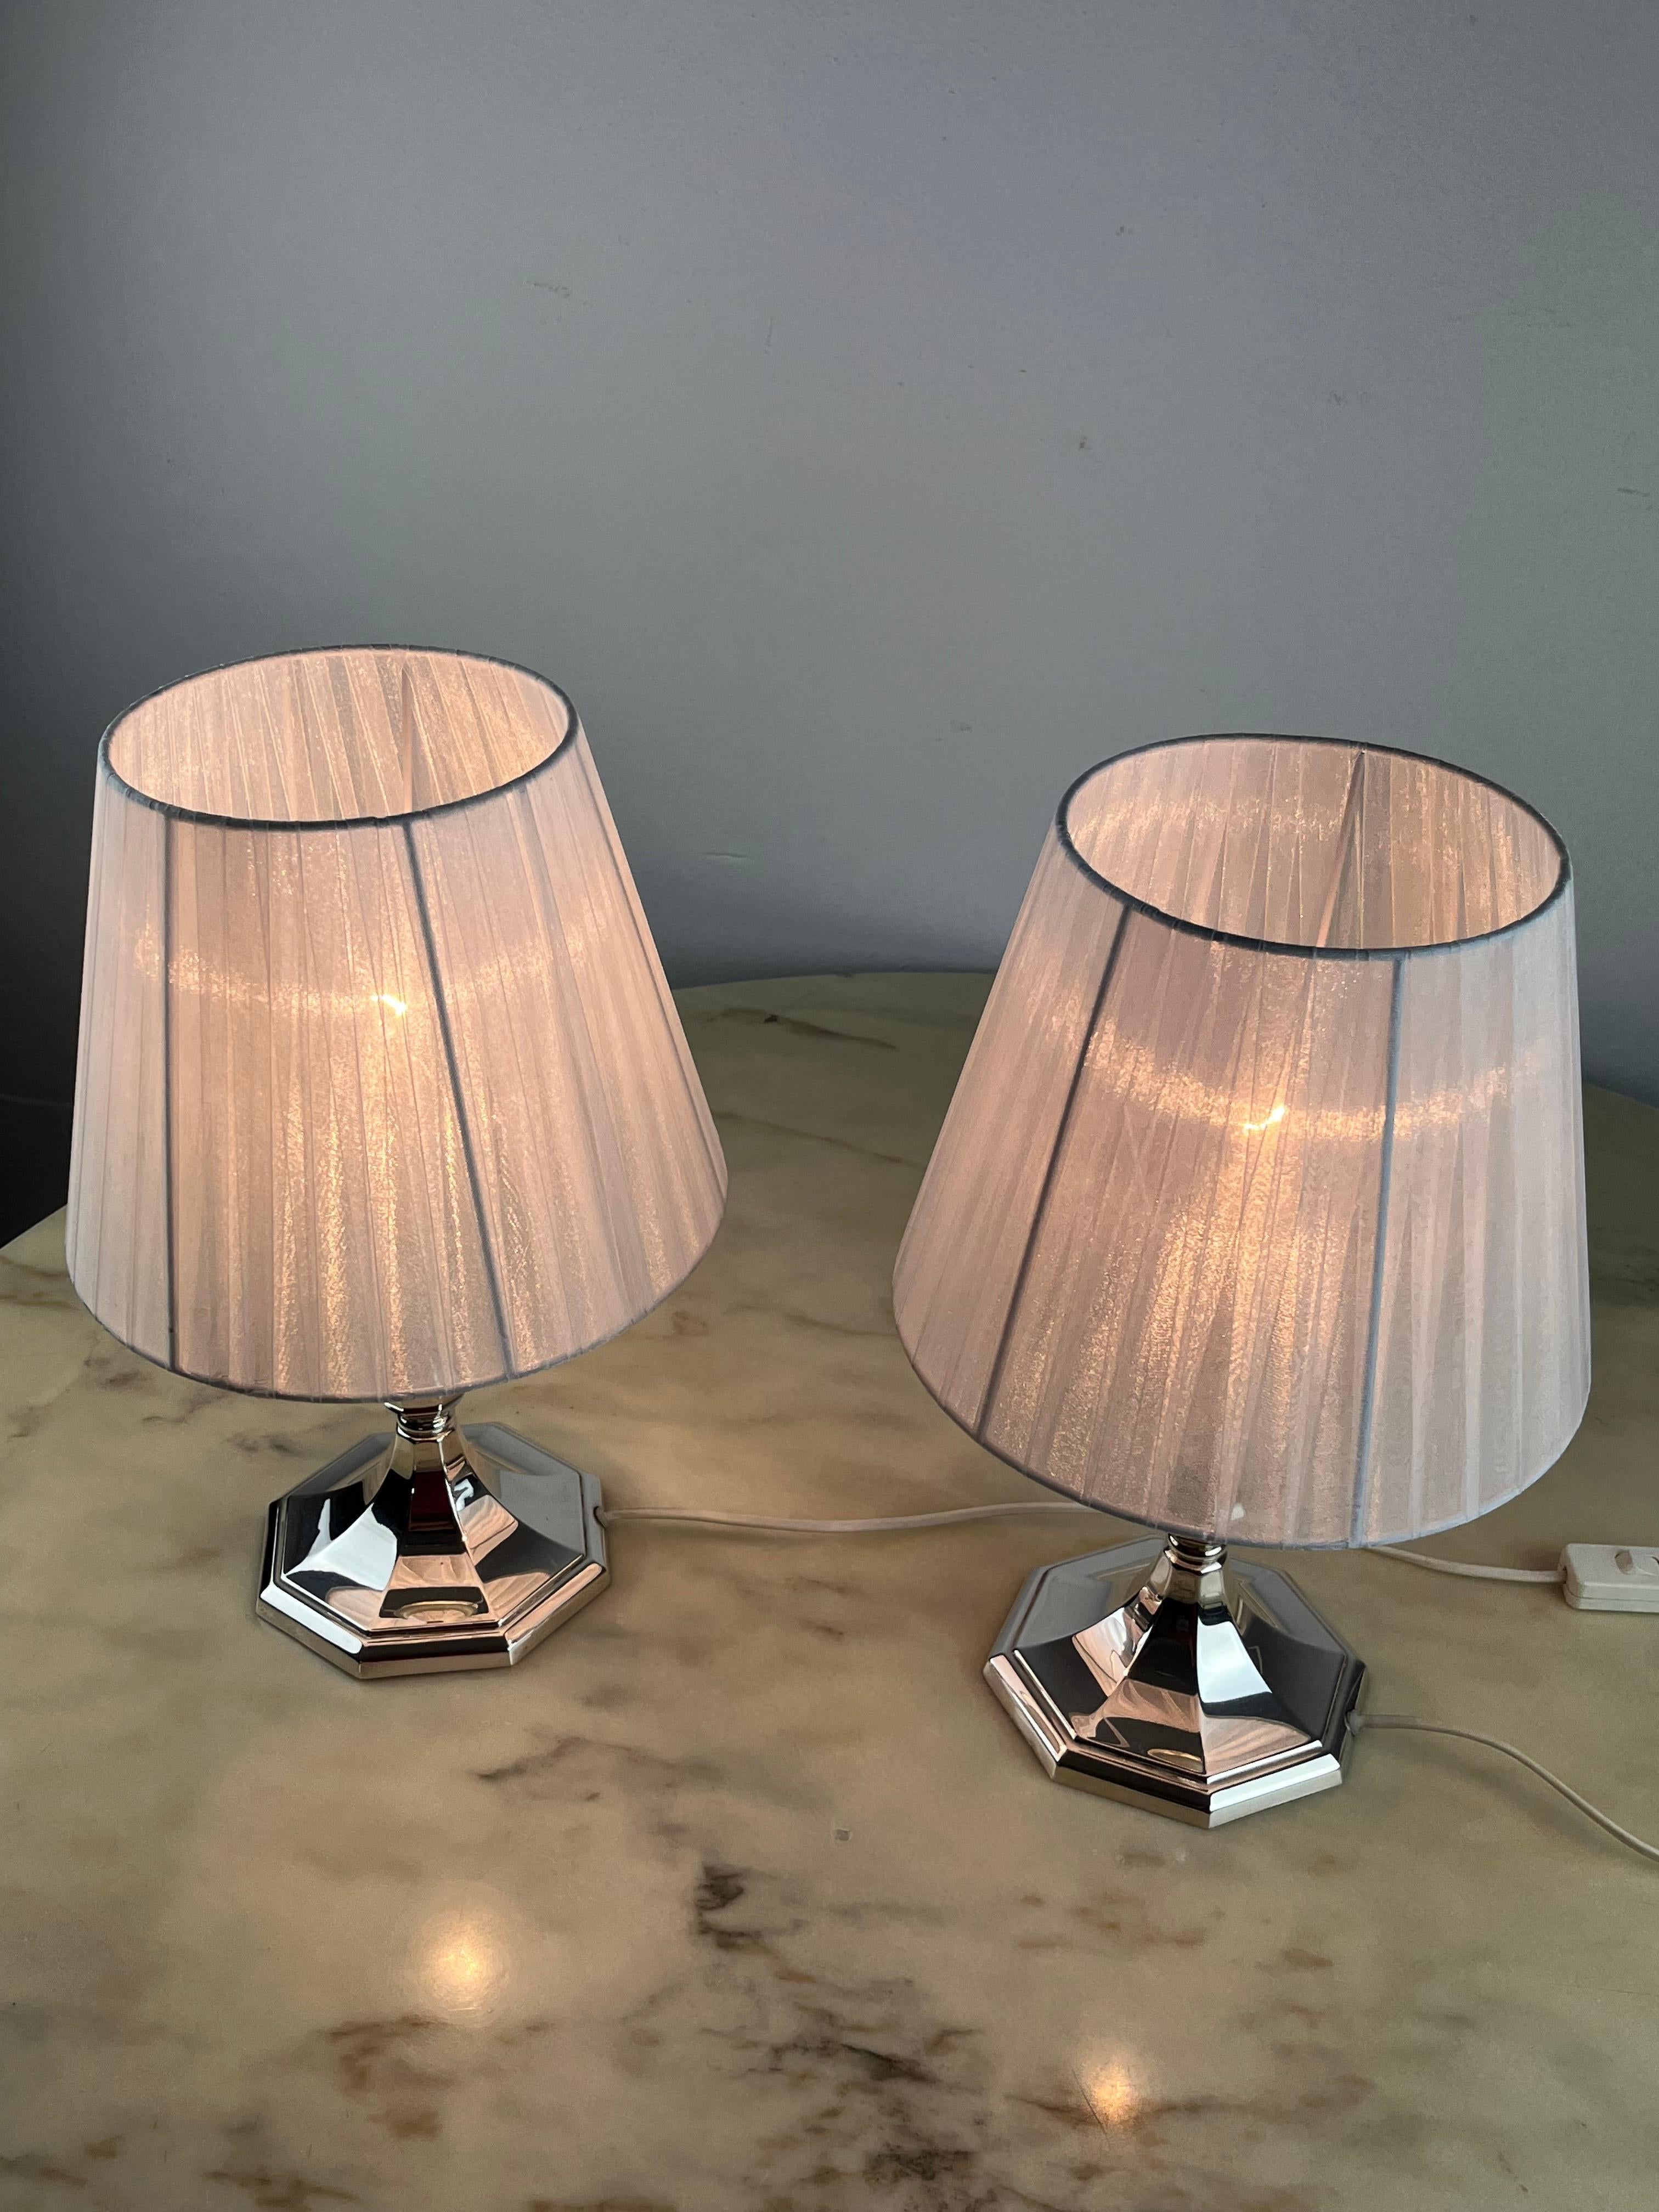 Pair of 800 silver bedside lamps, Vintage, Italy, 1980s. Found in a noble apartment, they are in excellent condition. Very small signs of the time. They are intact and functional. I replaced the lampshades because the old ones were worn out.